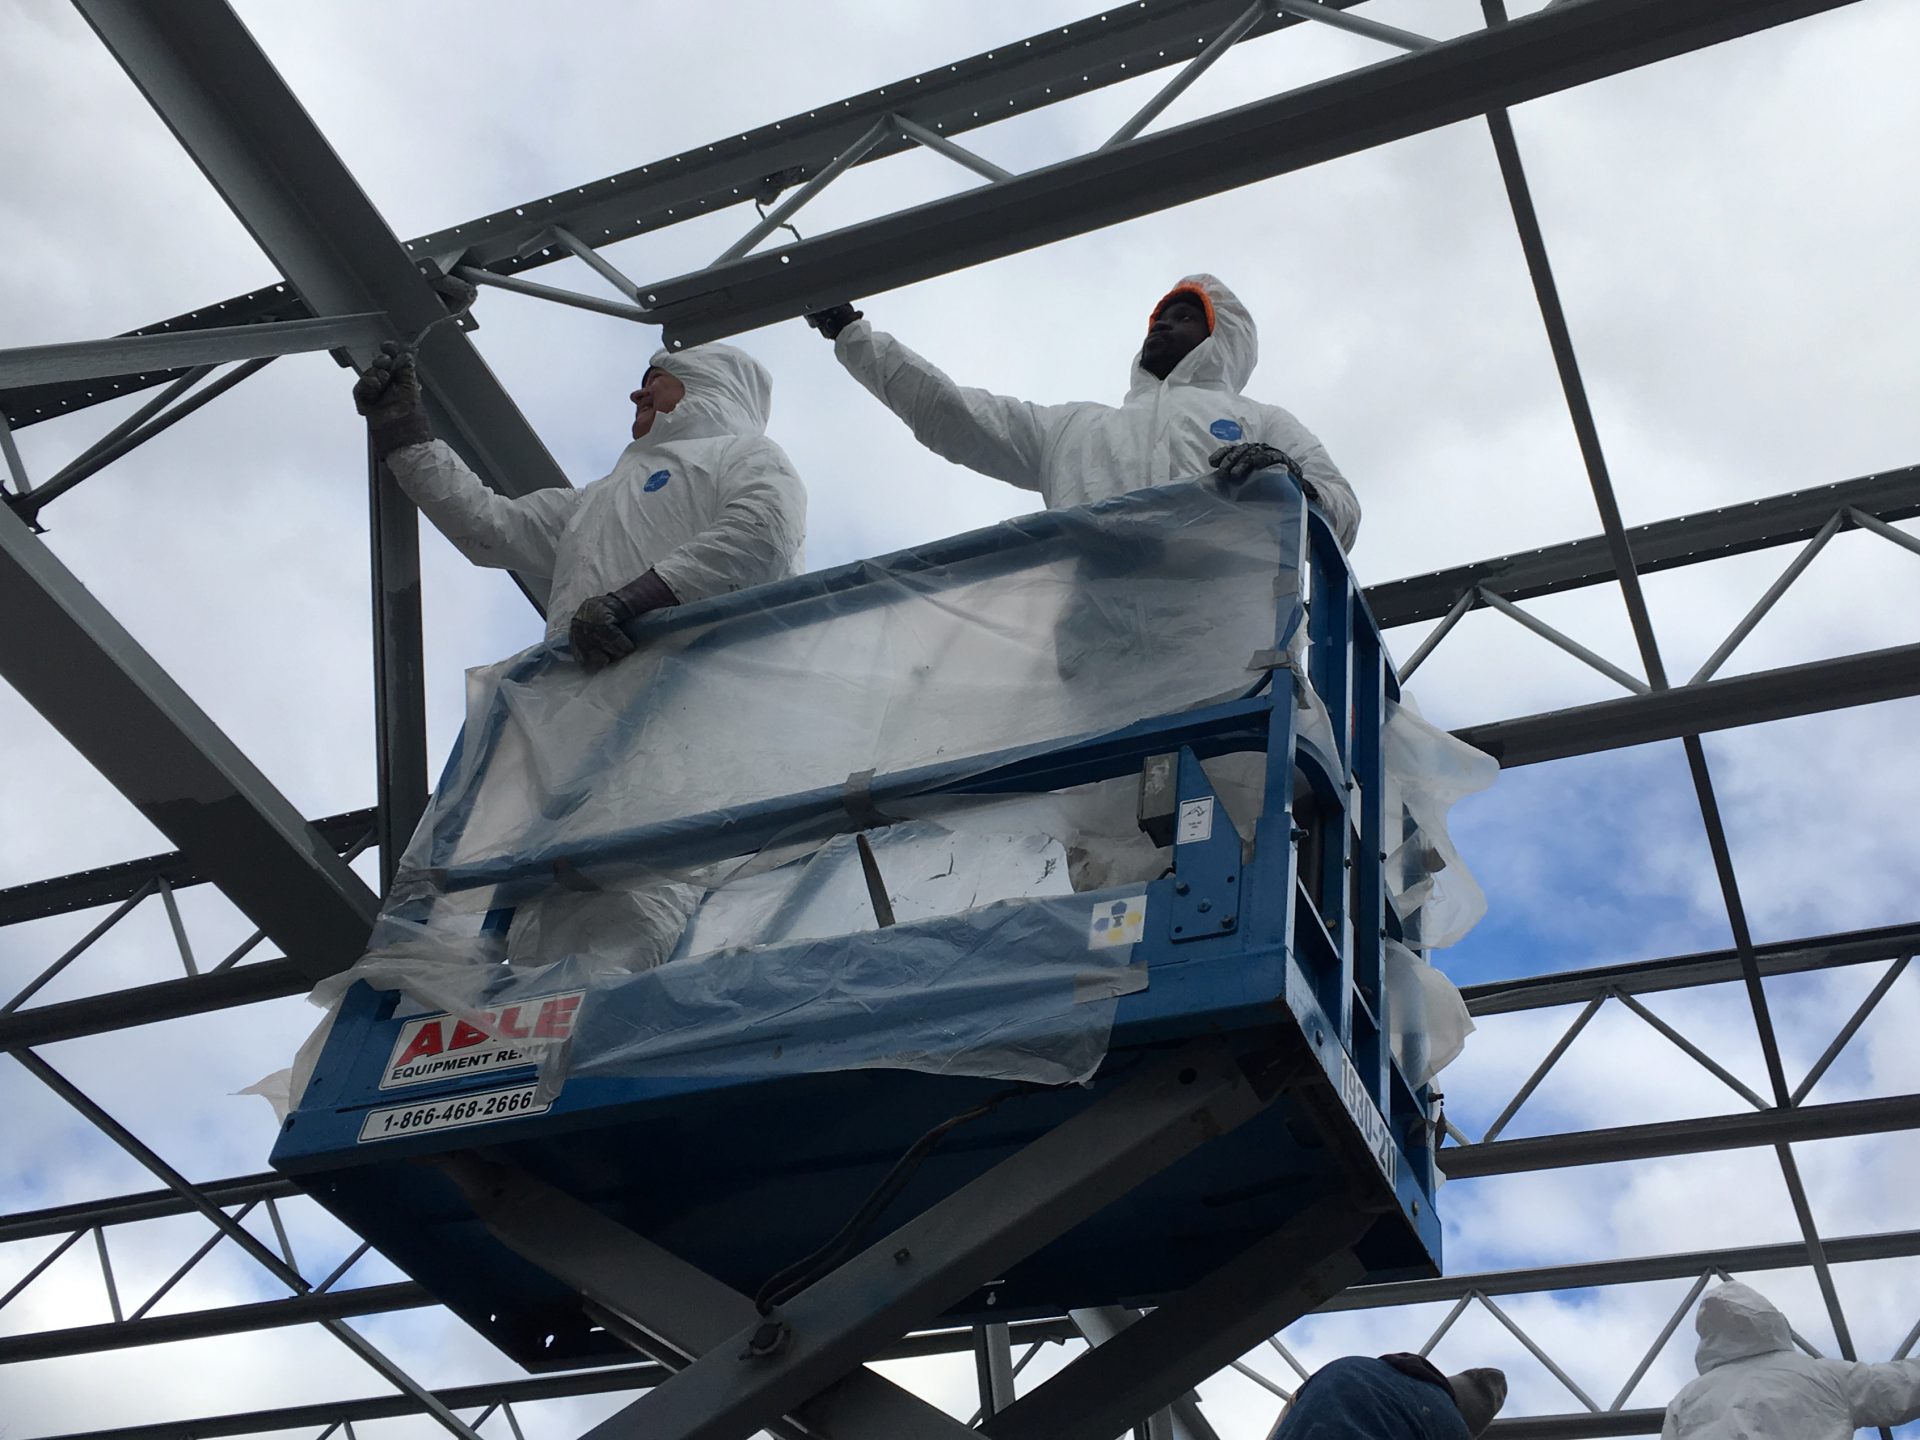 Lionel Henry (right), who works for a minority-owned contracting firm, repairs the roof of an outdoor hockey rink at Philadelphia’s Fishtown Recreation Center in December 2019. The project was part of a Philadelphia effort to expand participation of minority contractors in city-funded construction jobs.